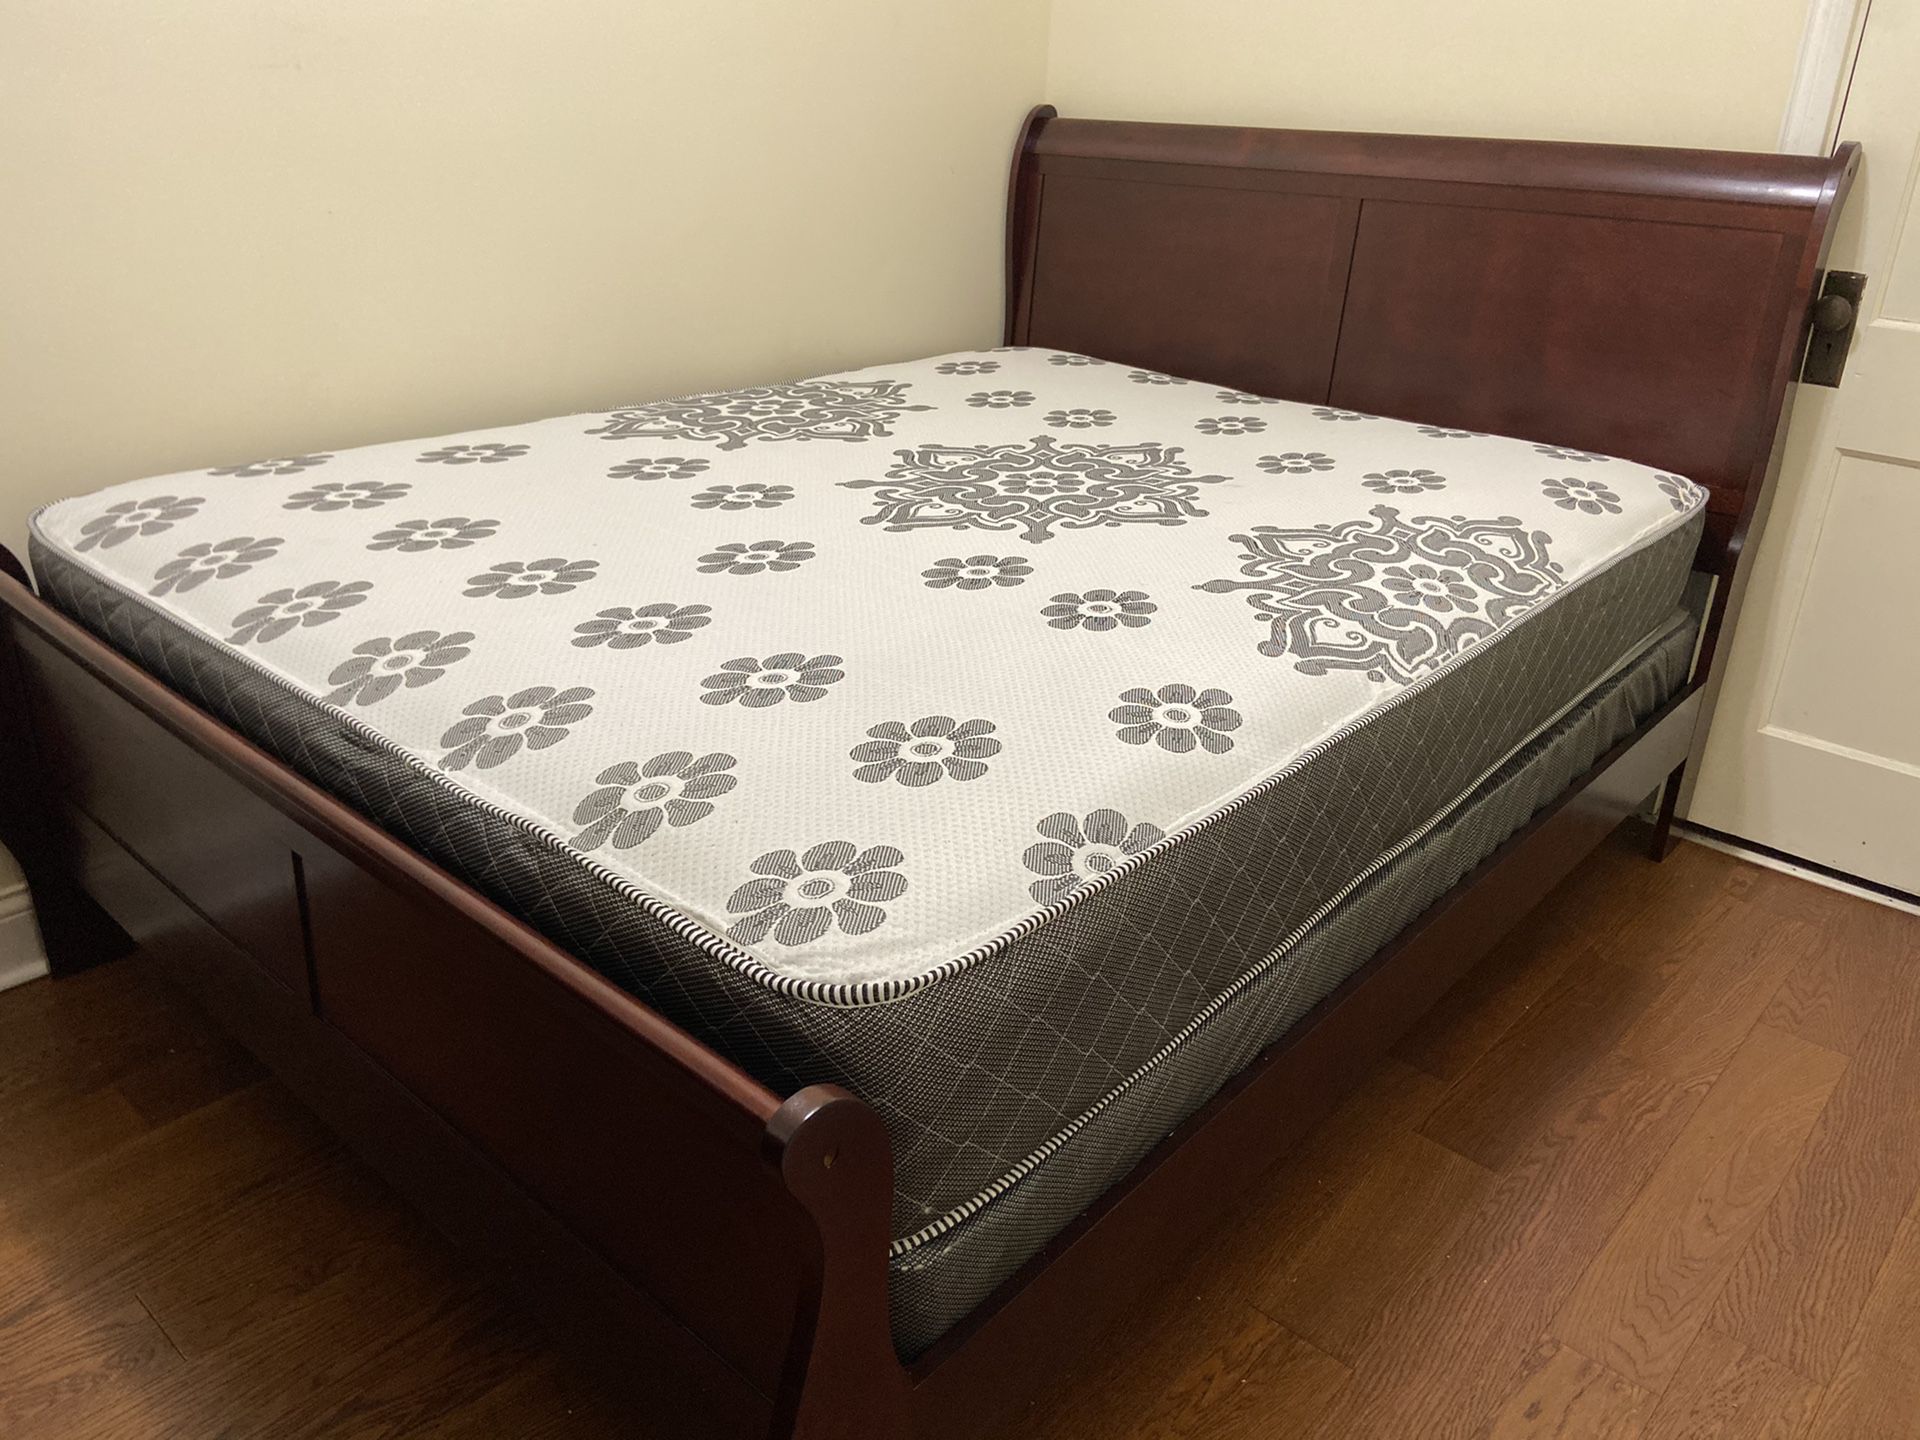 Brand new cherry sleigh bed with mattress and box spring